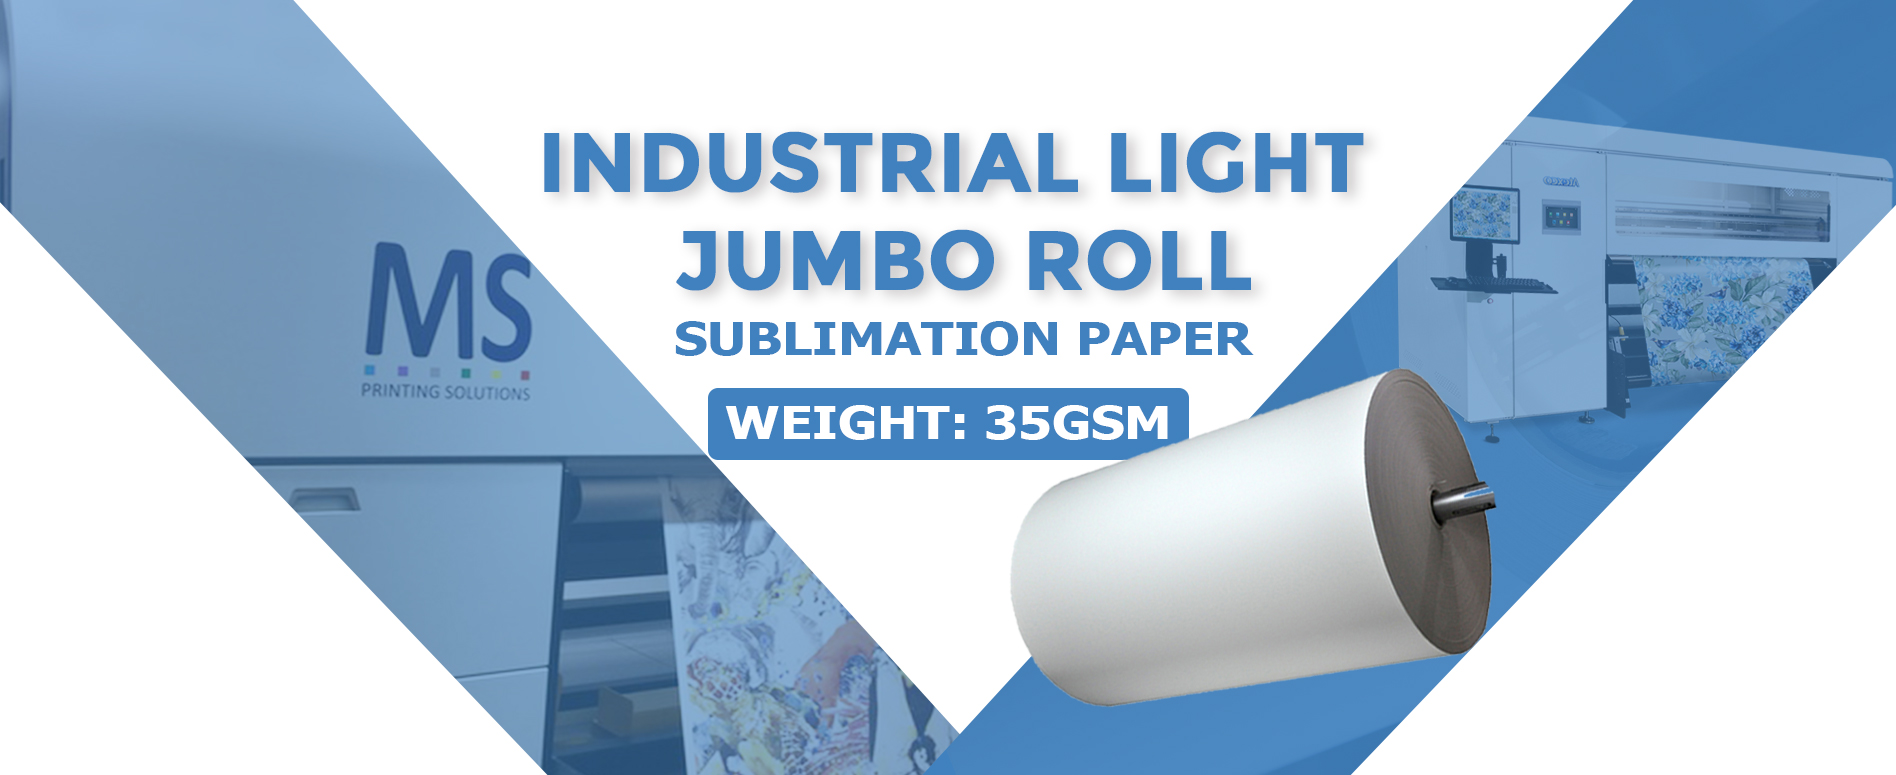 Subtextile New Product: 35gsm INDUSTRIAL LIGHT®Jumbo Roll Sublimation Paper